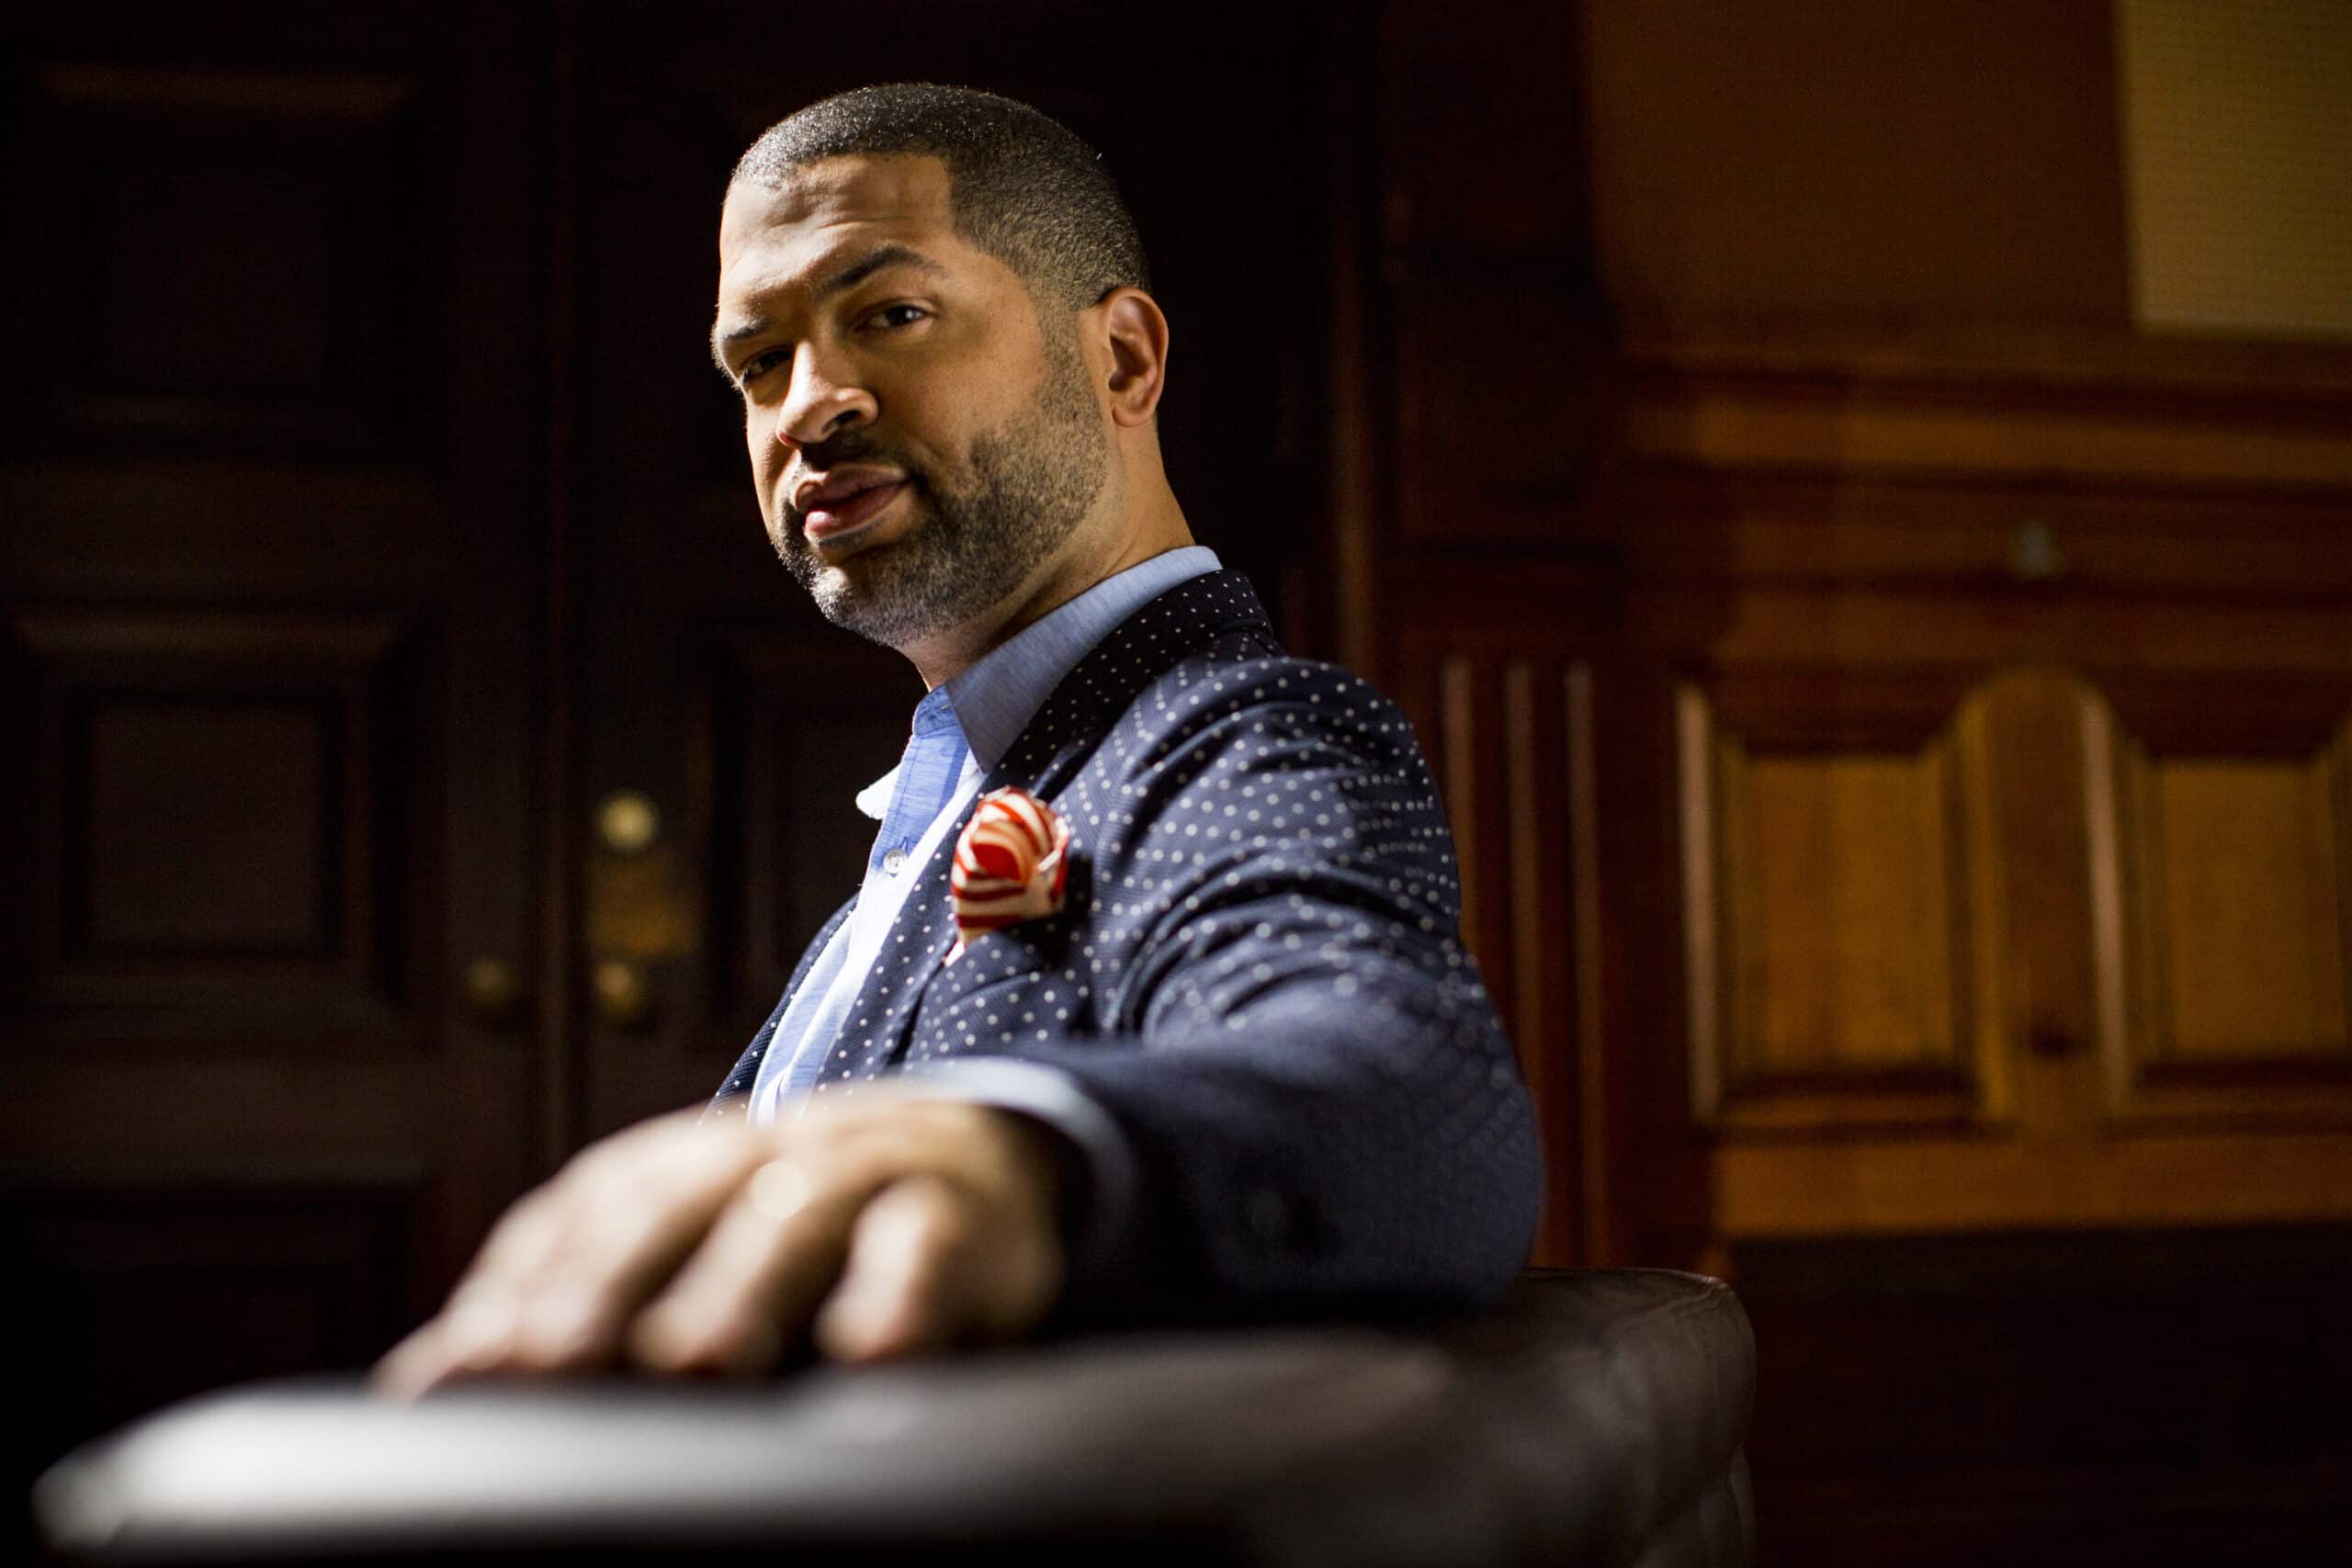 Jason Moran will perform at Jazzy Sundays in Discovery Green